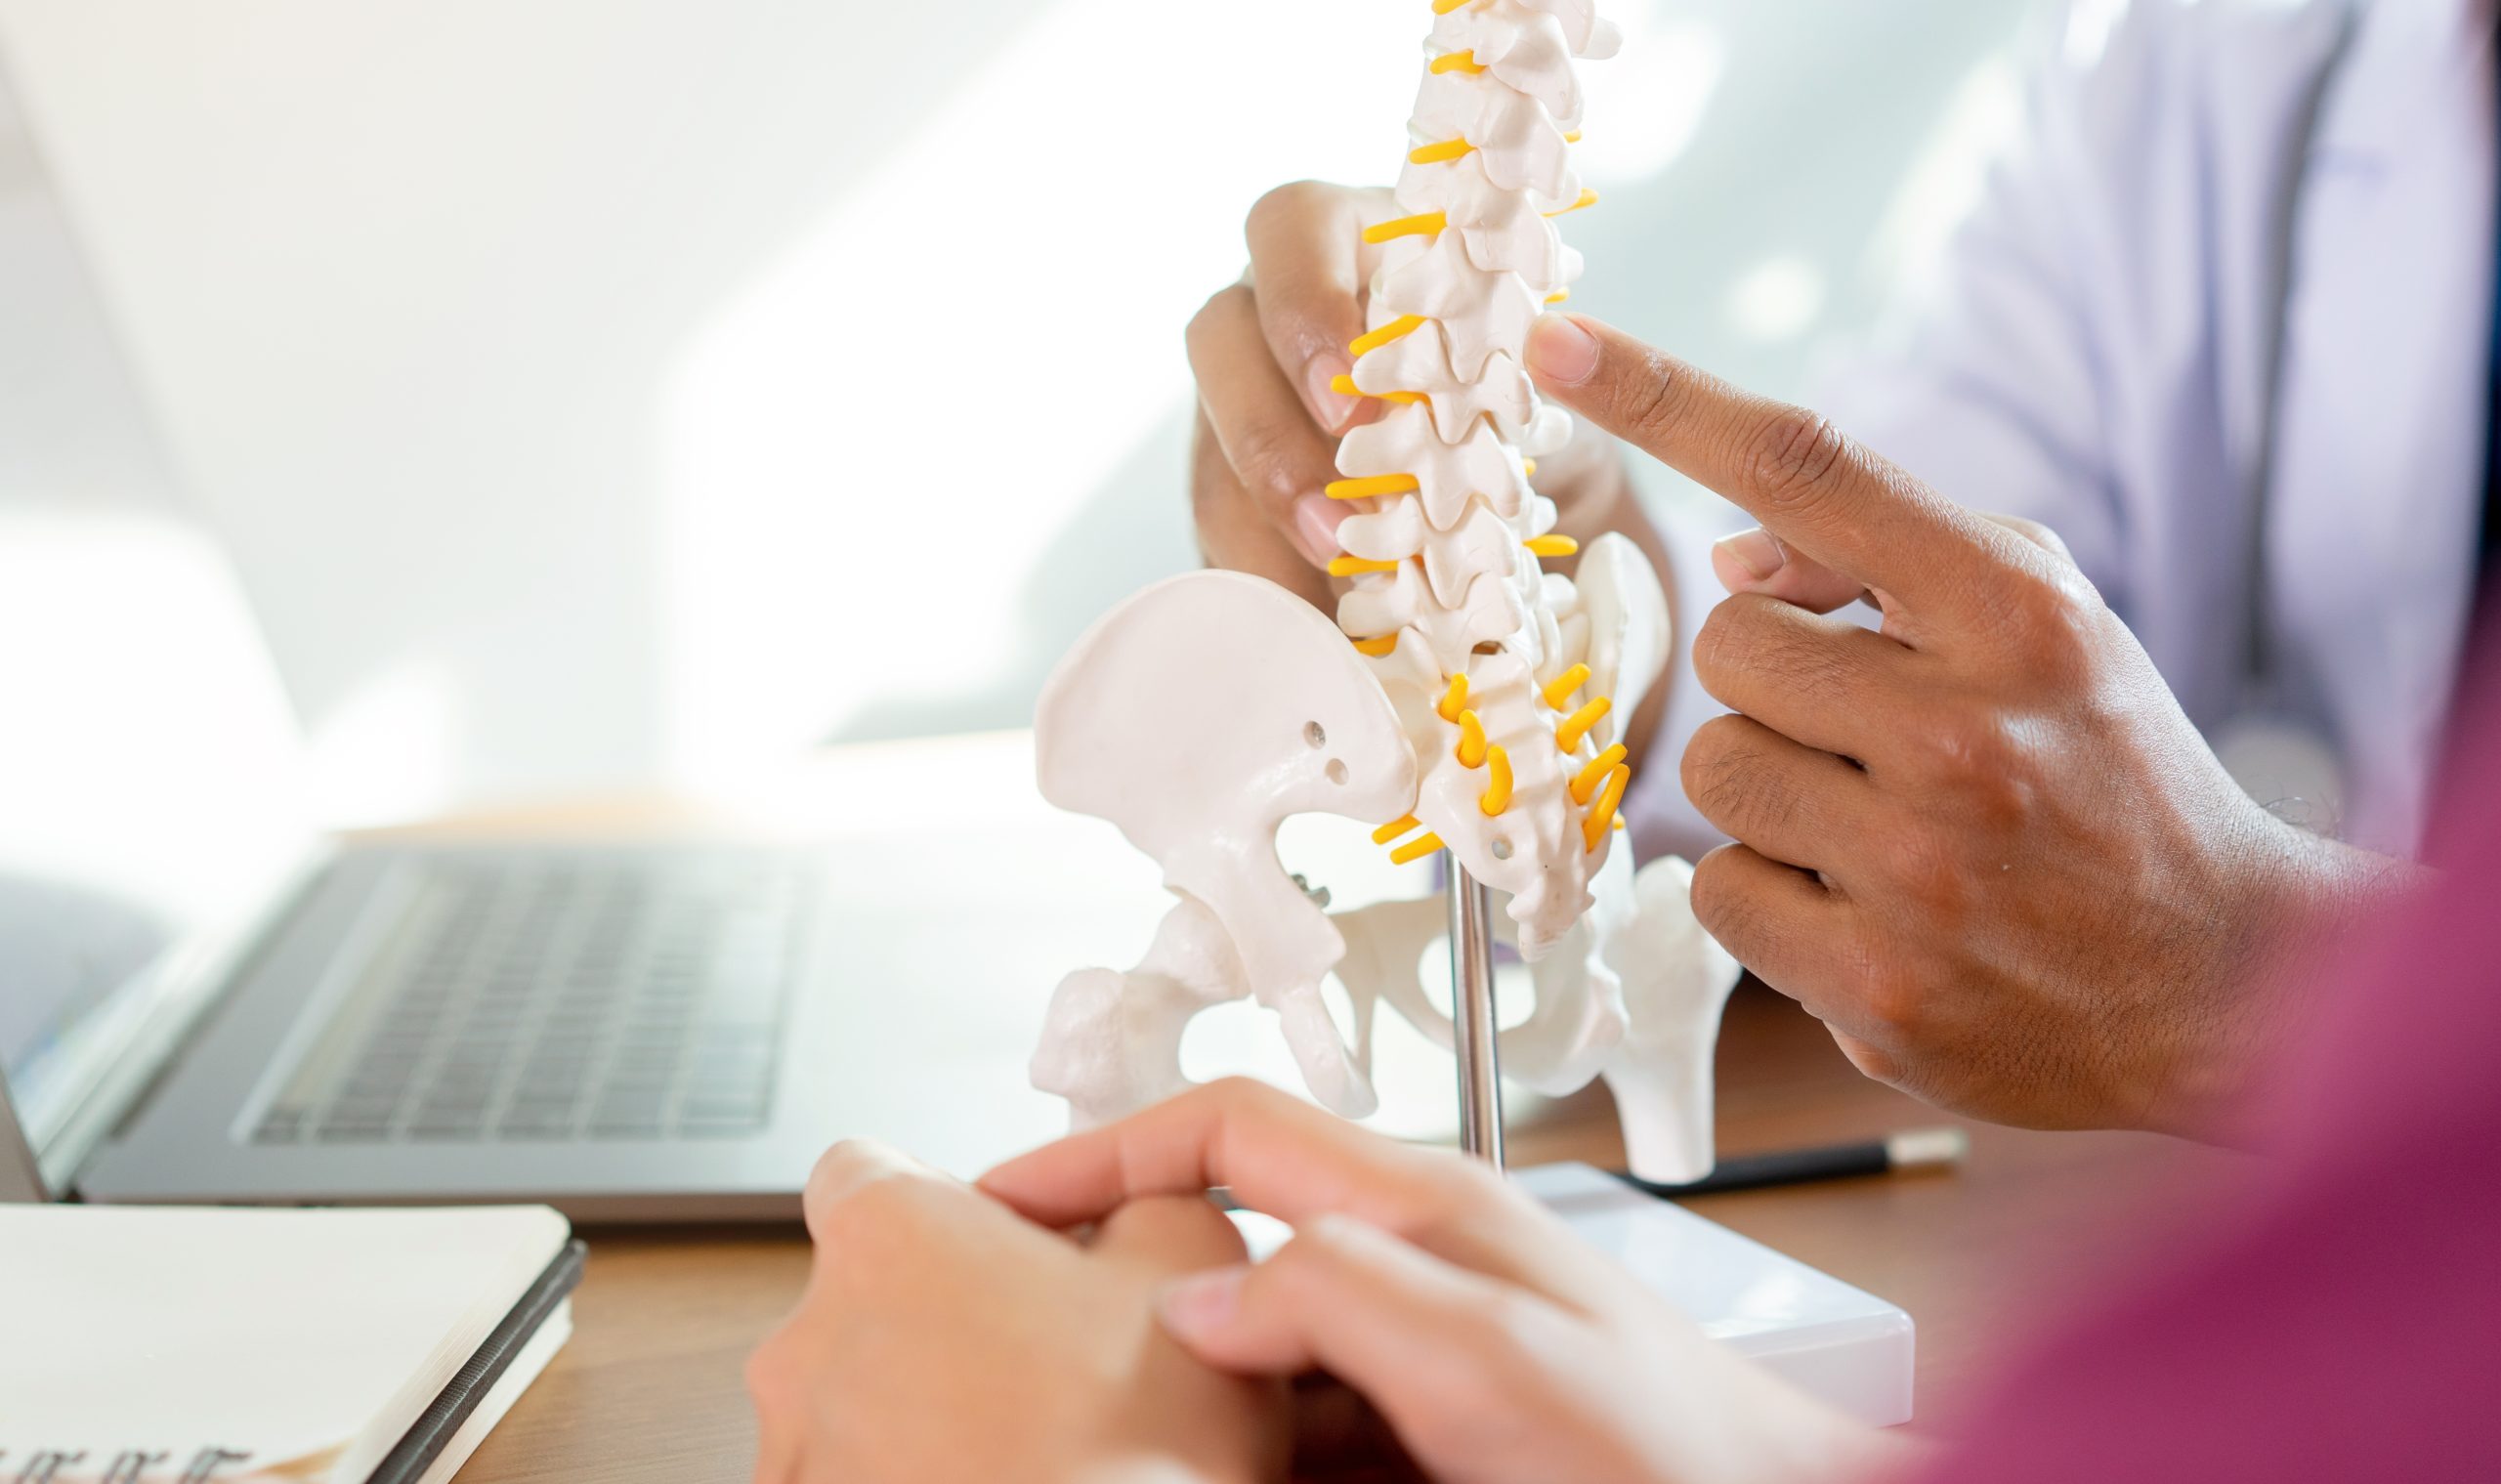 Chiropractic Care For Upper Cervical Pain Near Everett, WA